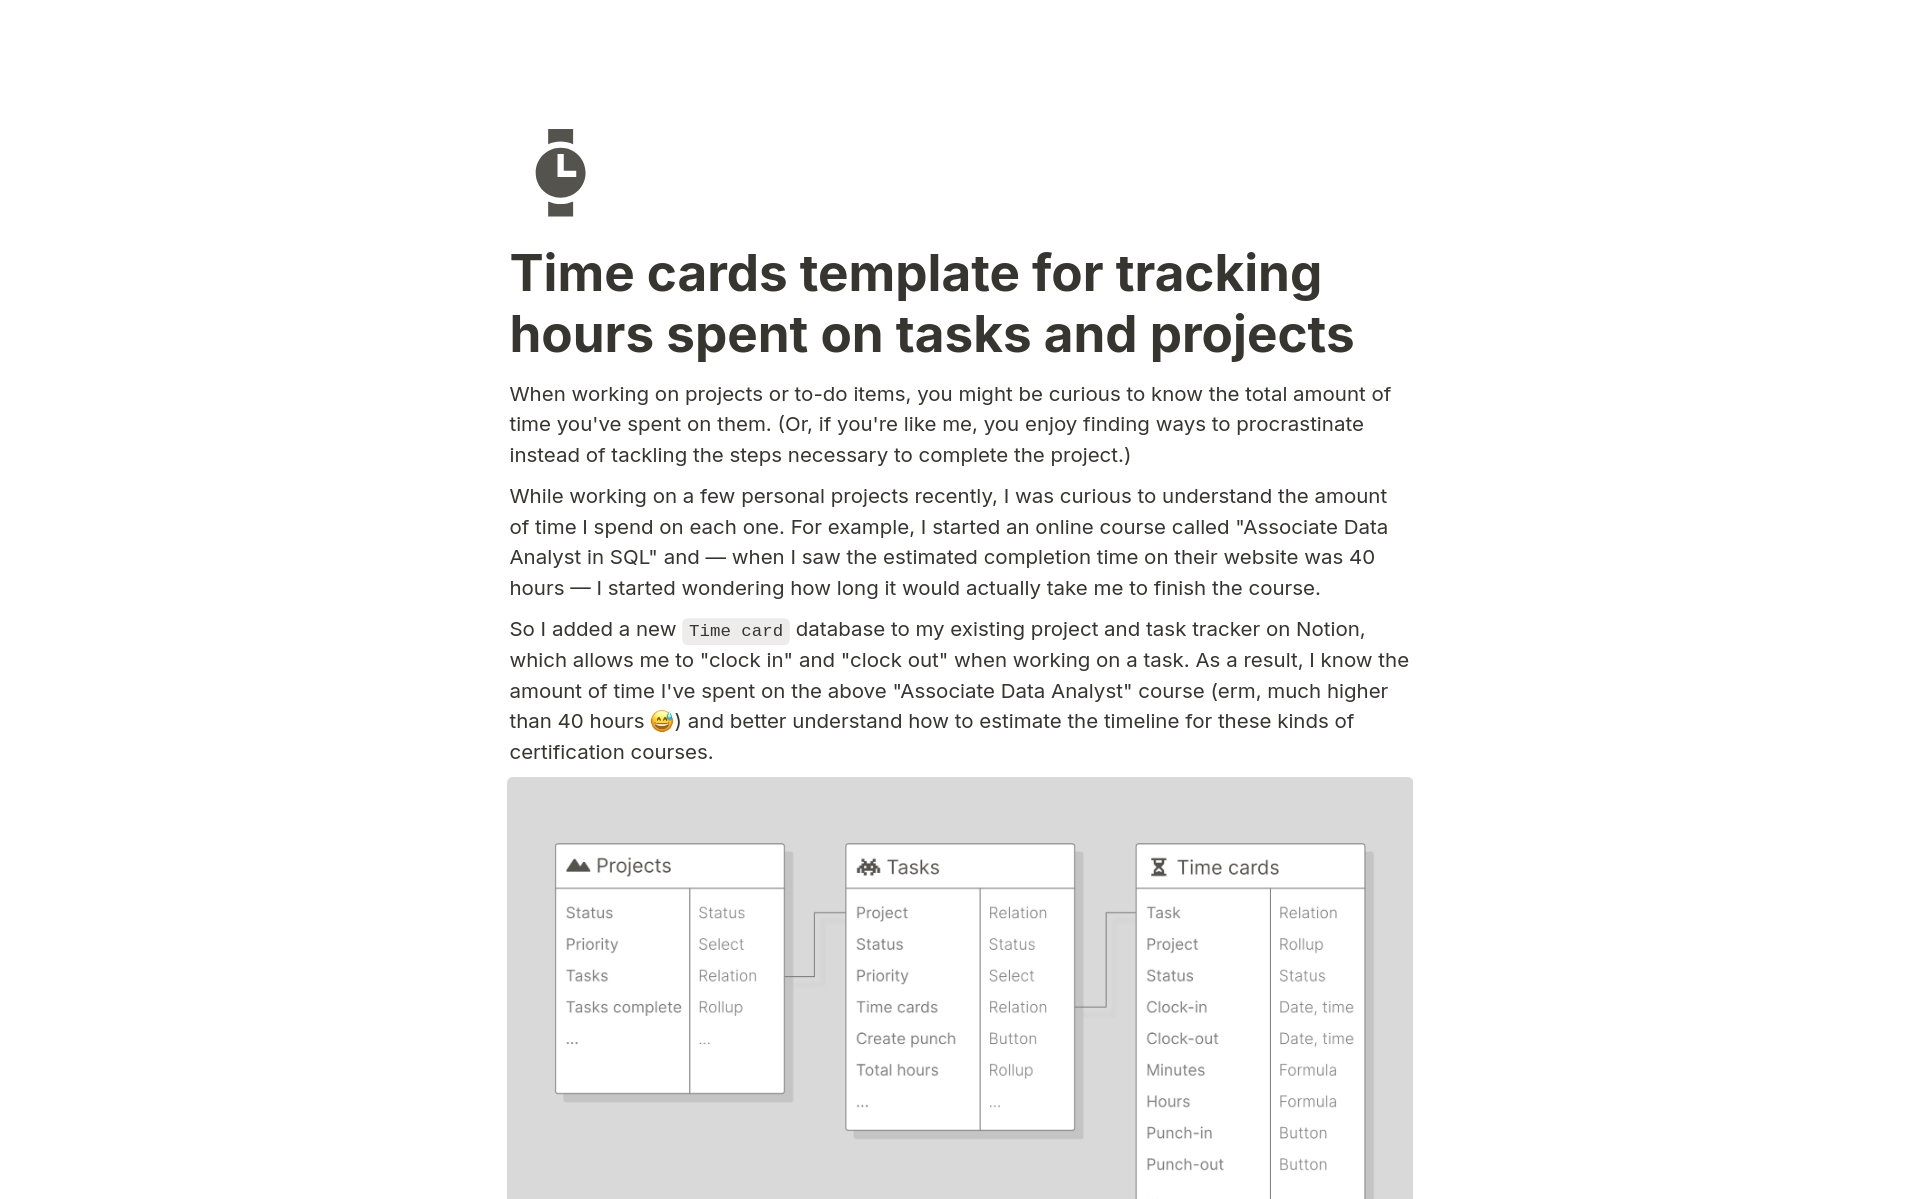 Do you want to track time spent on tasks and projects? This template includes a "Time cards" database, so you can clock-in and clock-out and see the total hours you've spent on the task.  